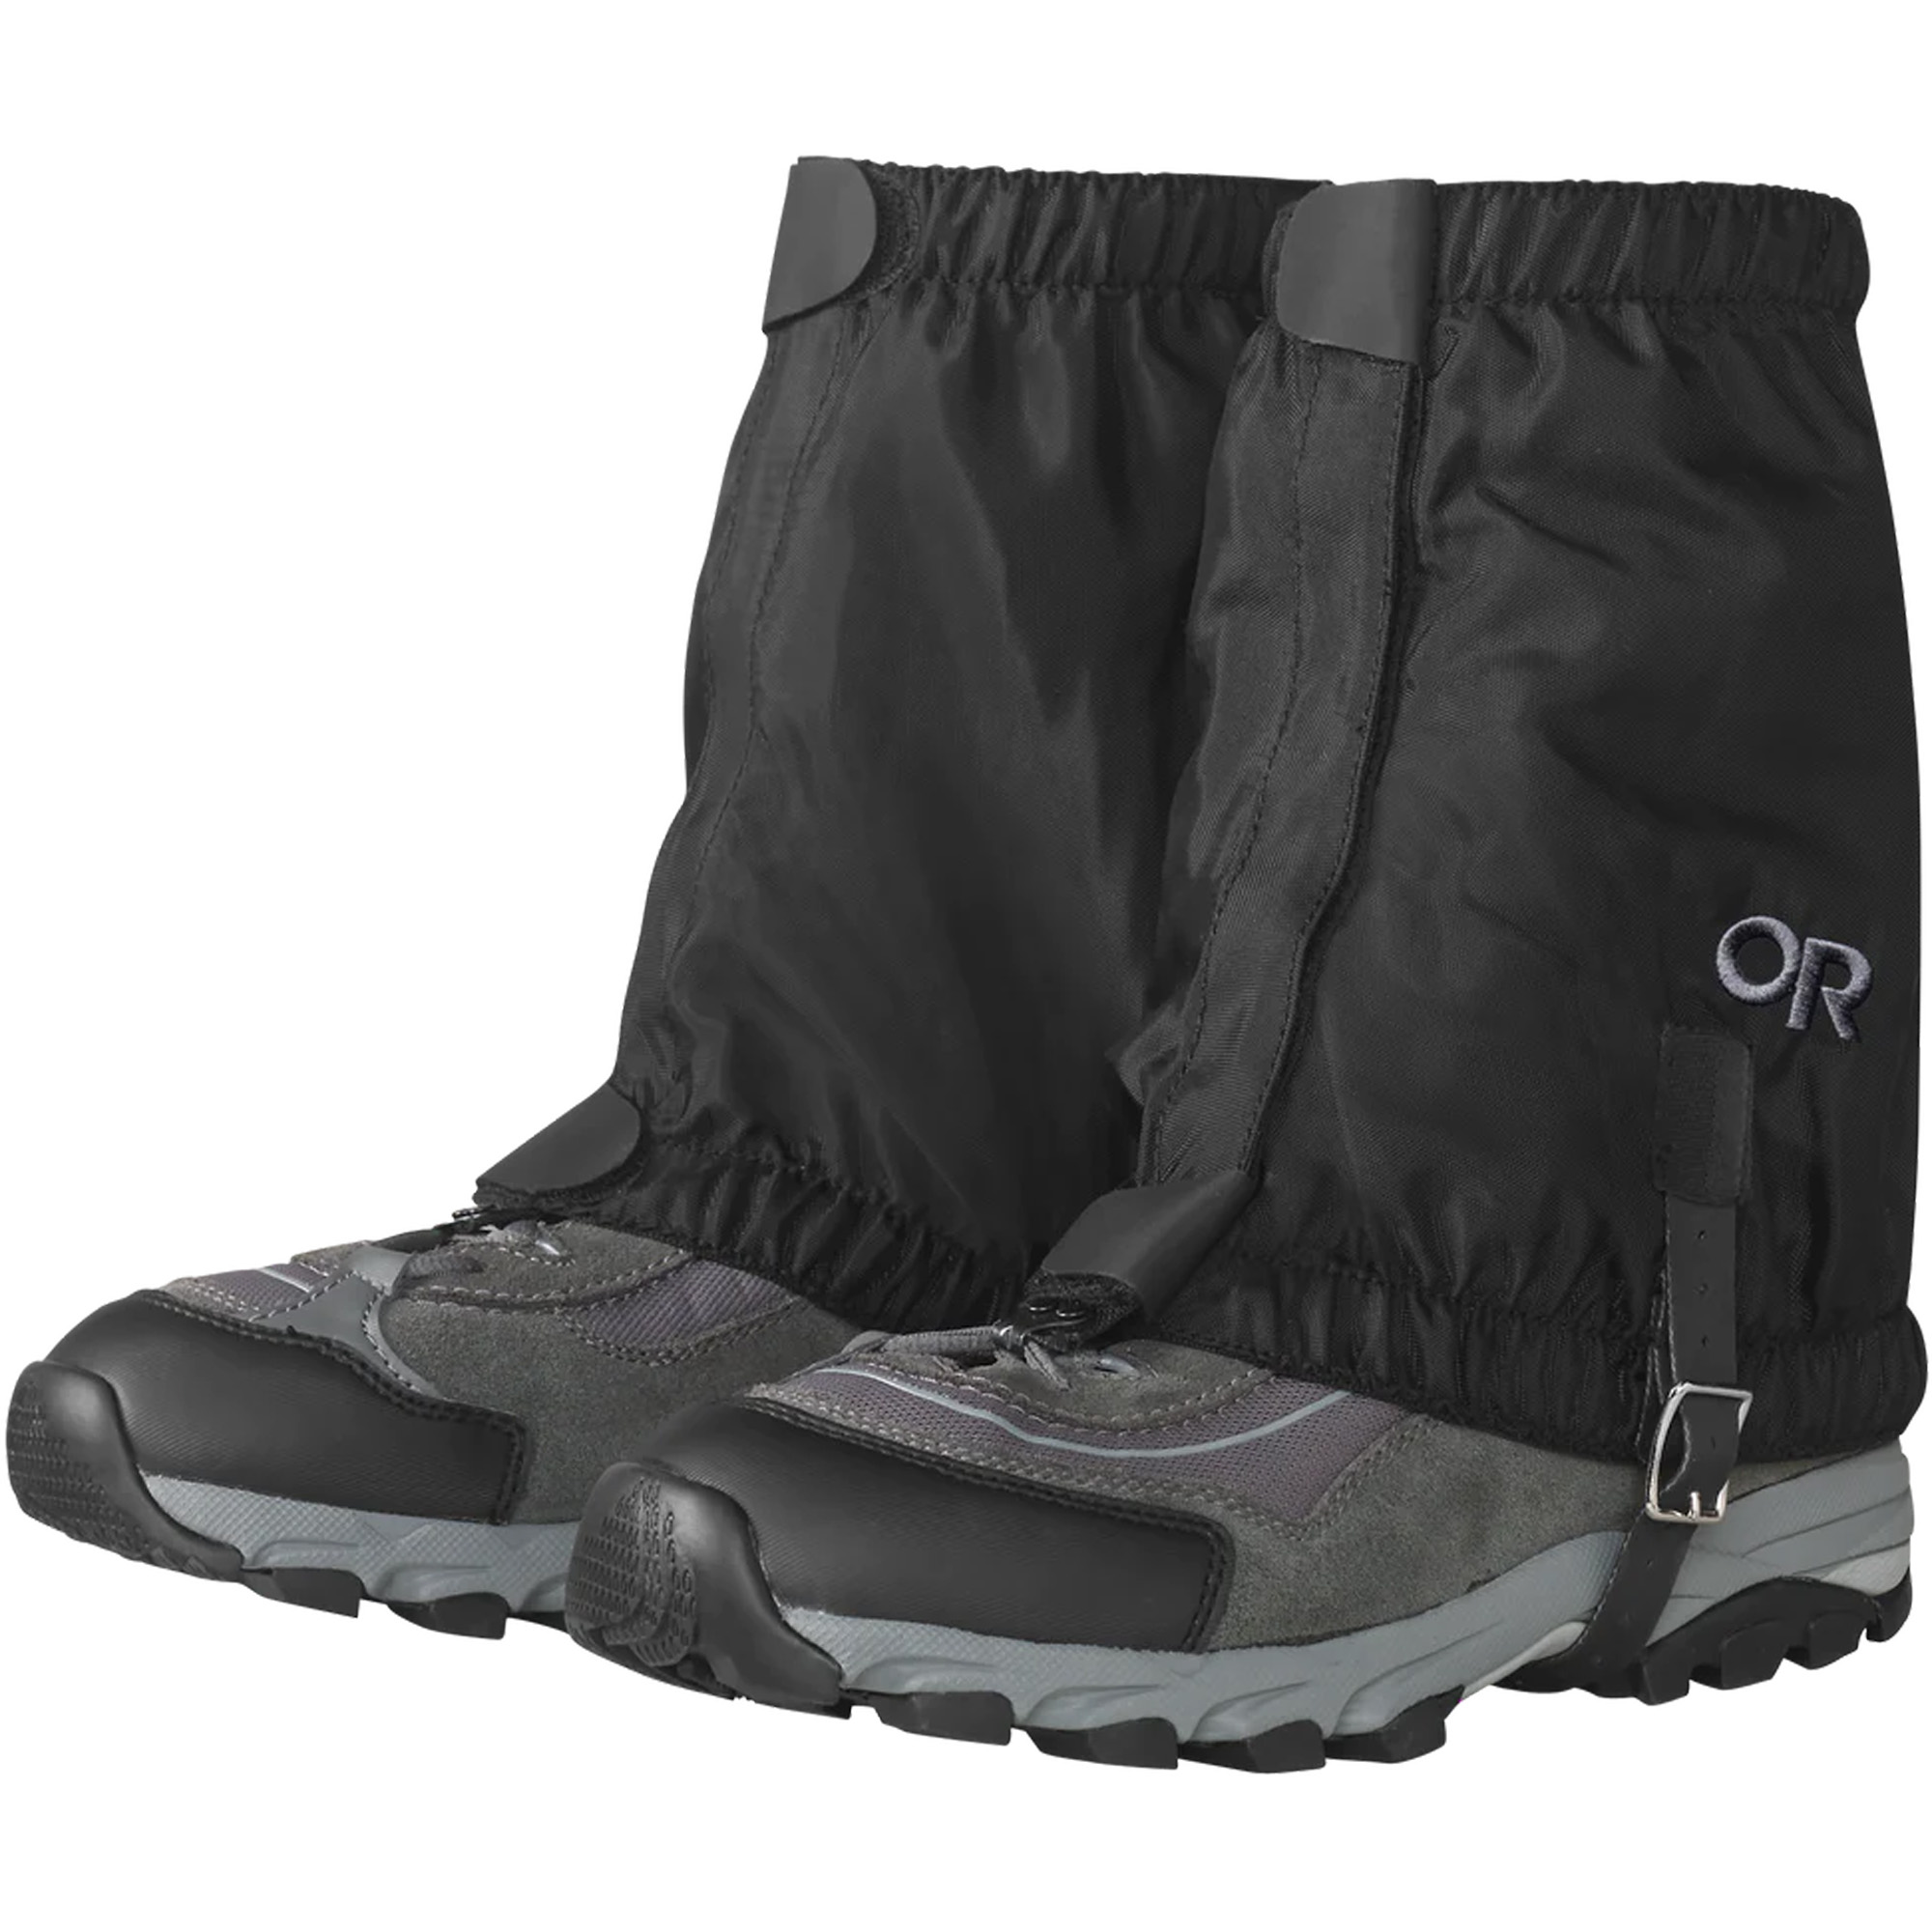 Outdoor Research Rocky Mountain Low Boot Gaiters